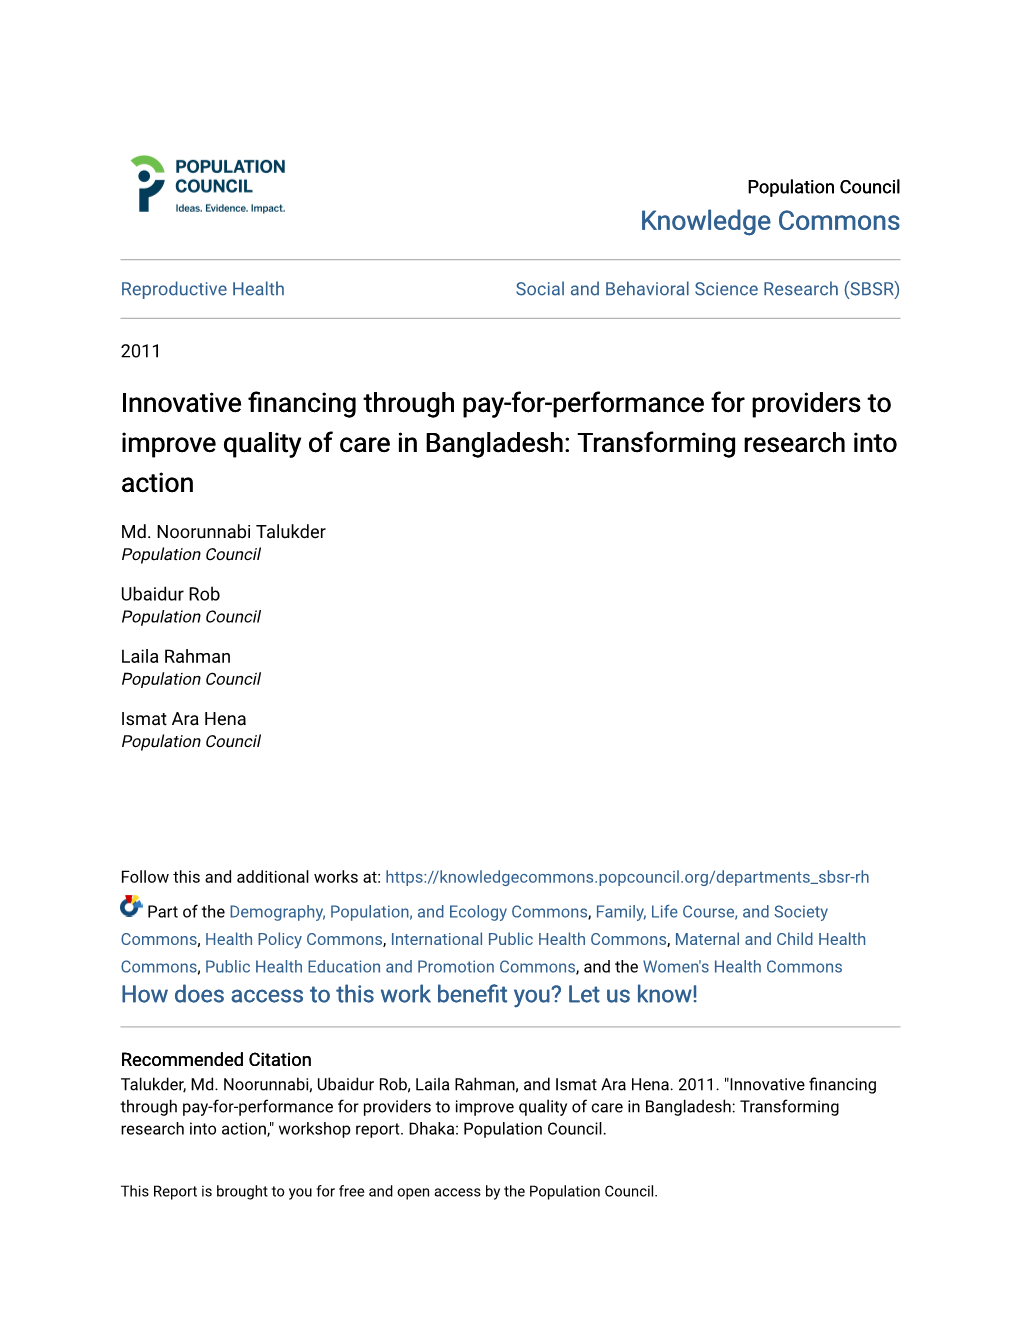 Innovative Financing Through Pay-For-Performance for Providers to Improve Quality of Care in Bangladesh: Transforming Research Into Action